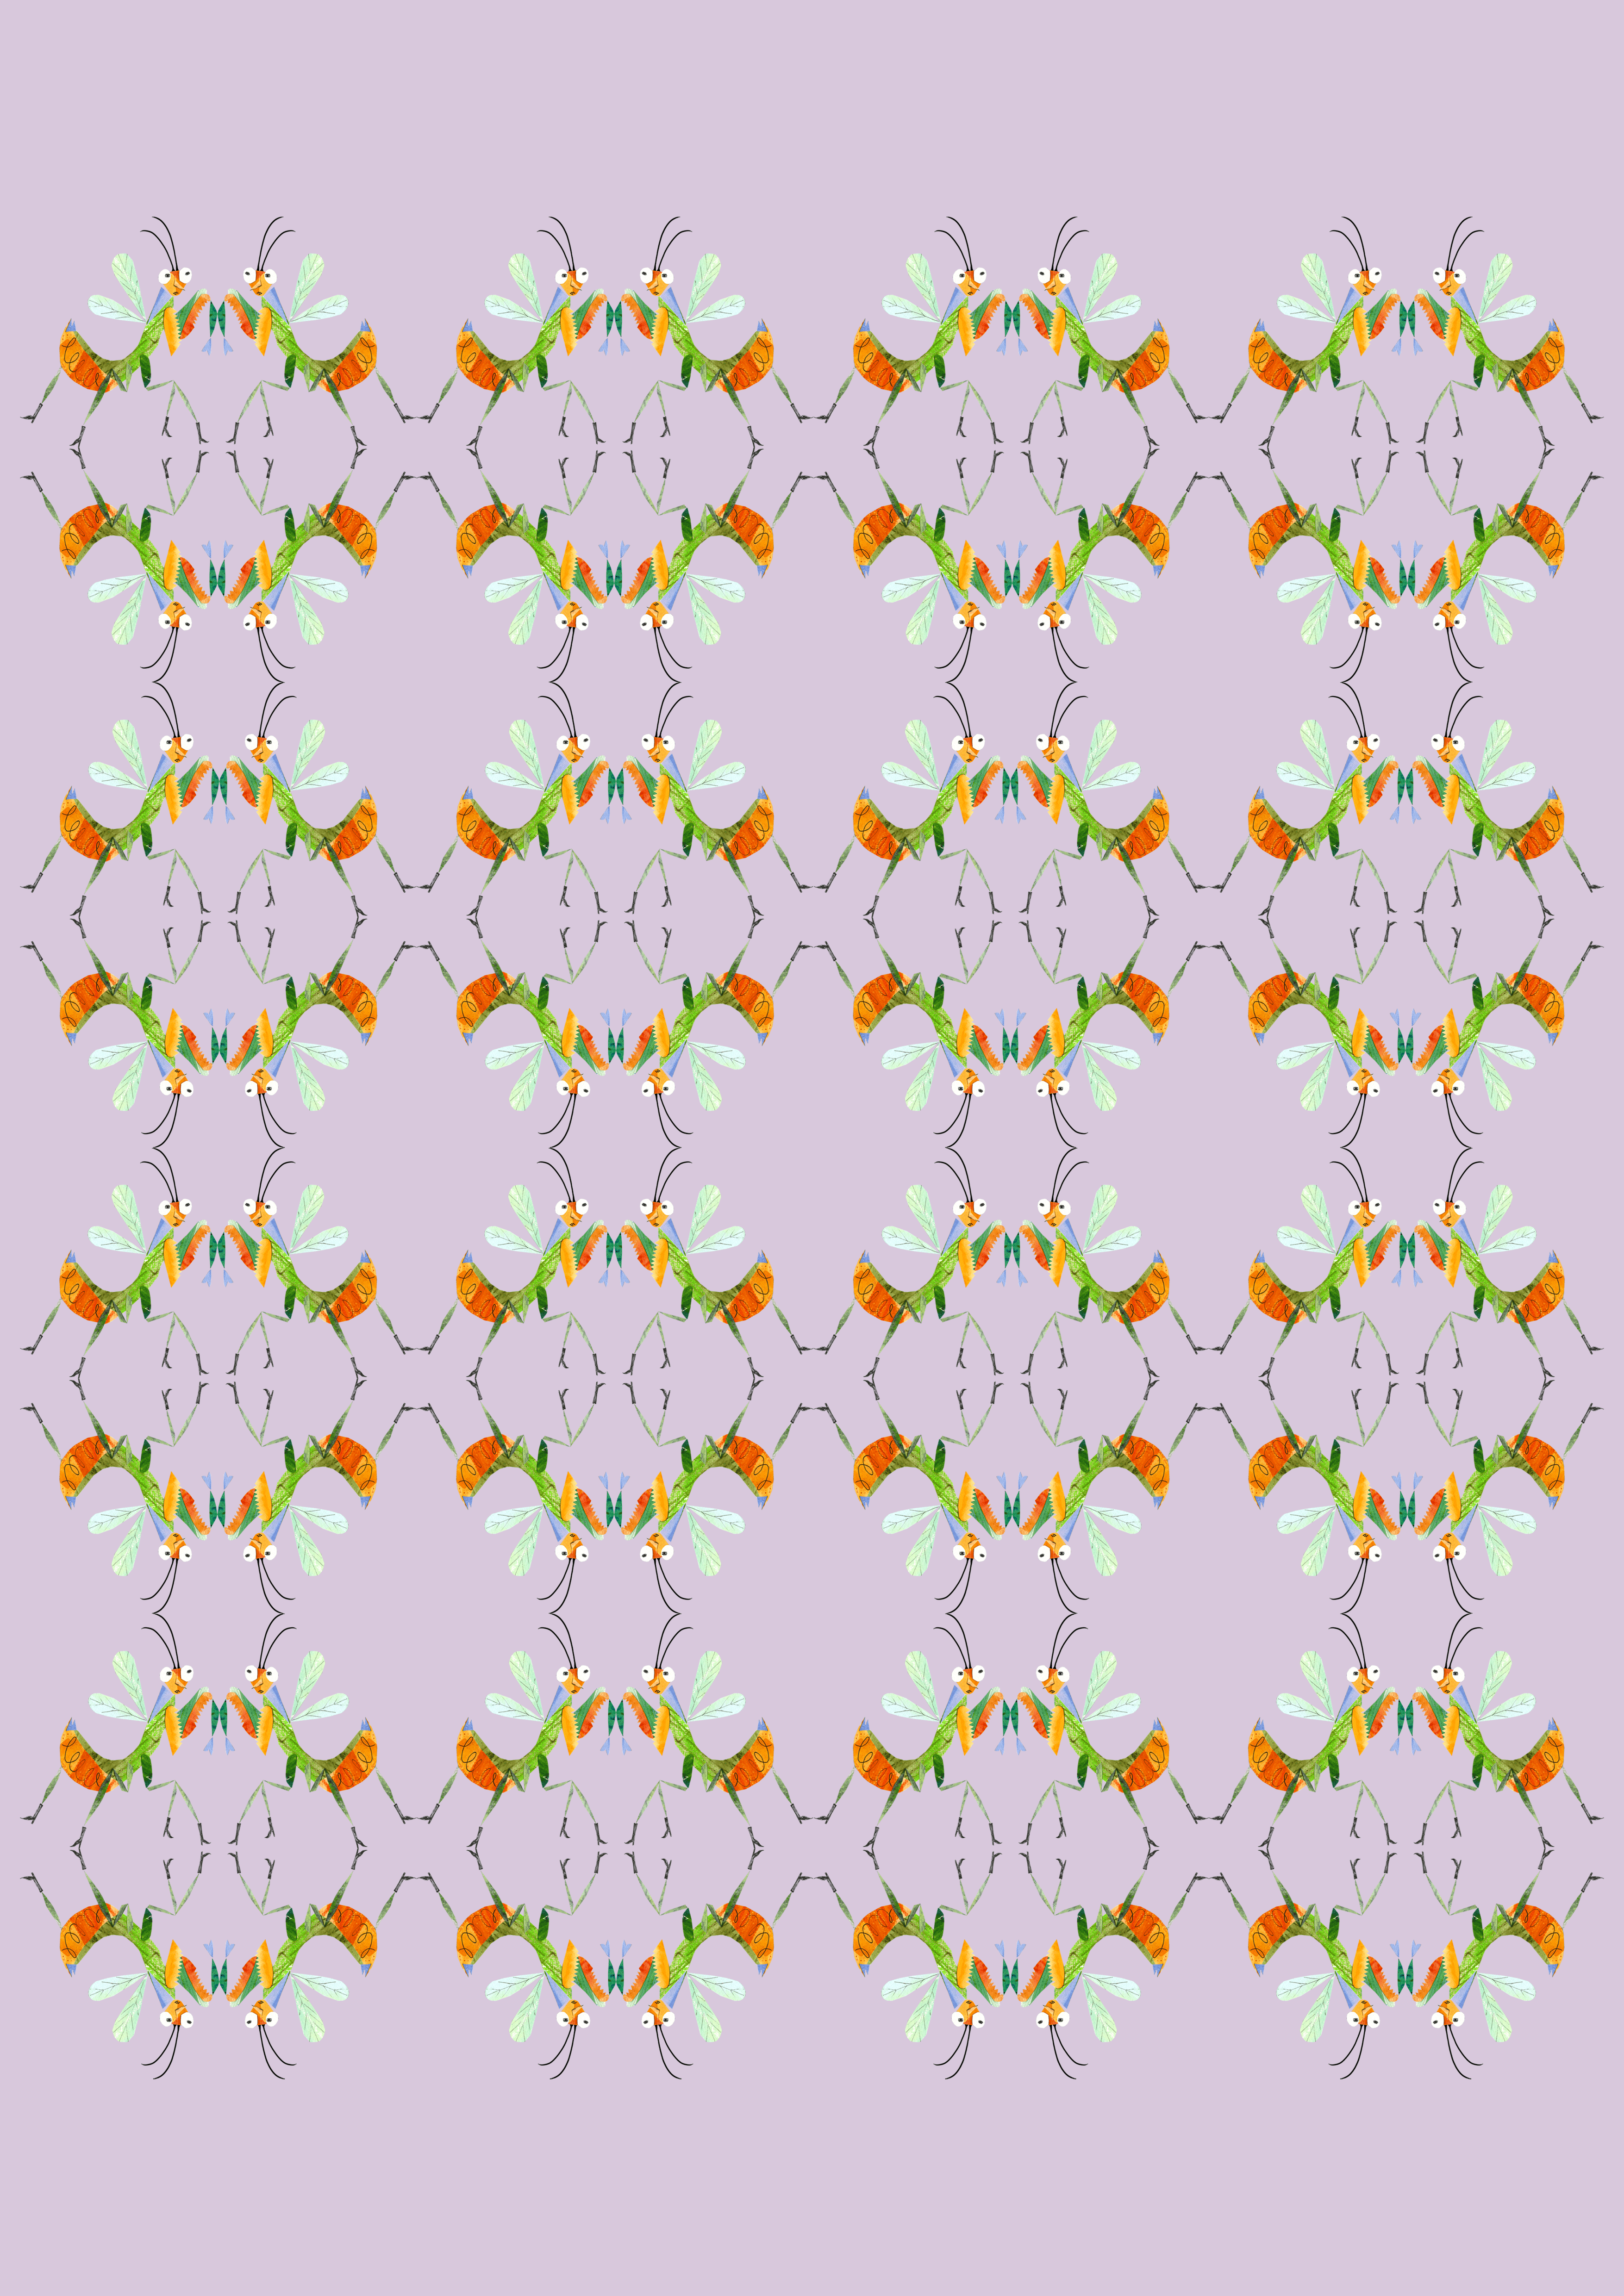 Illustration pattern by Hannah Dee showing a repeated insect pattern